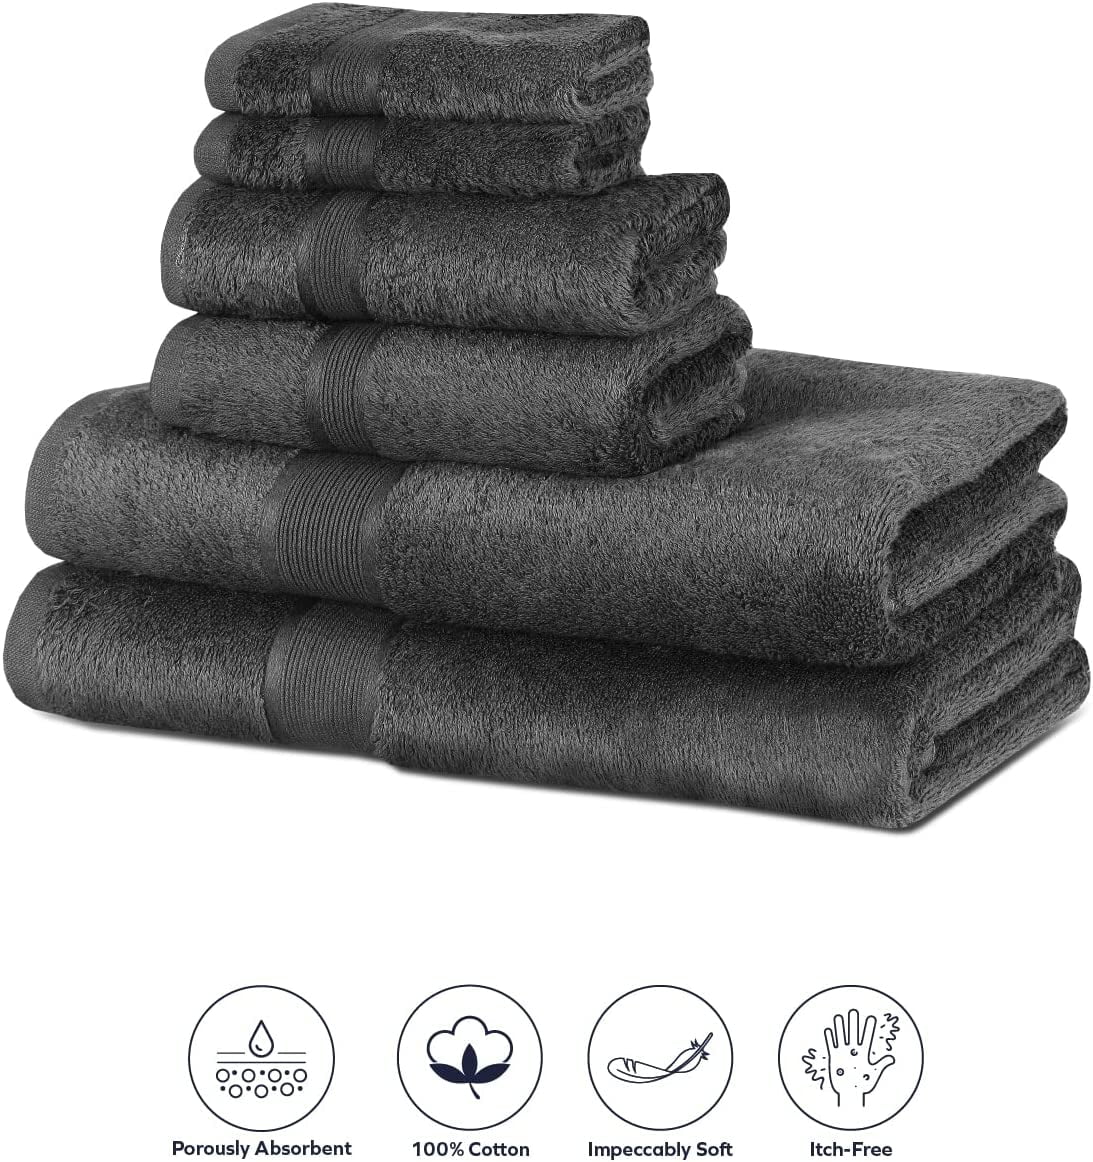 Under The Canopy Luxe Organic Cotton Towel - Snow, Snow / 6-Piece Bath Towel Set 6-Piece Bath Towel Set Snow